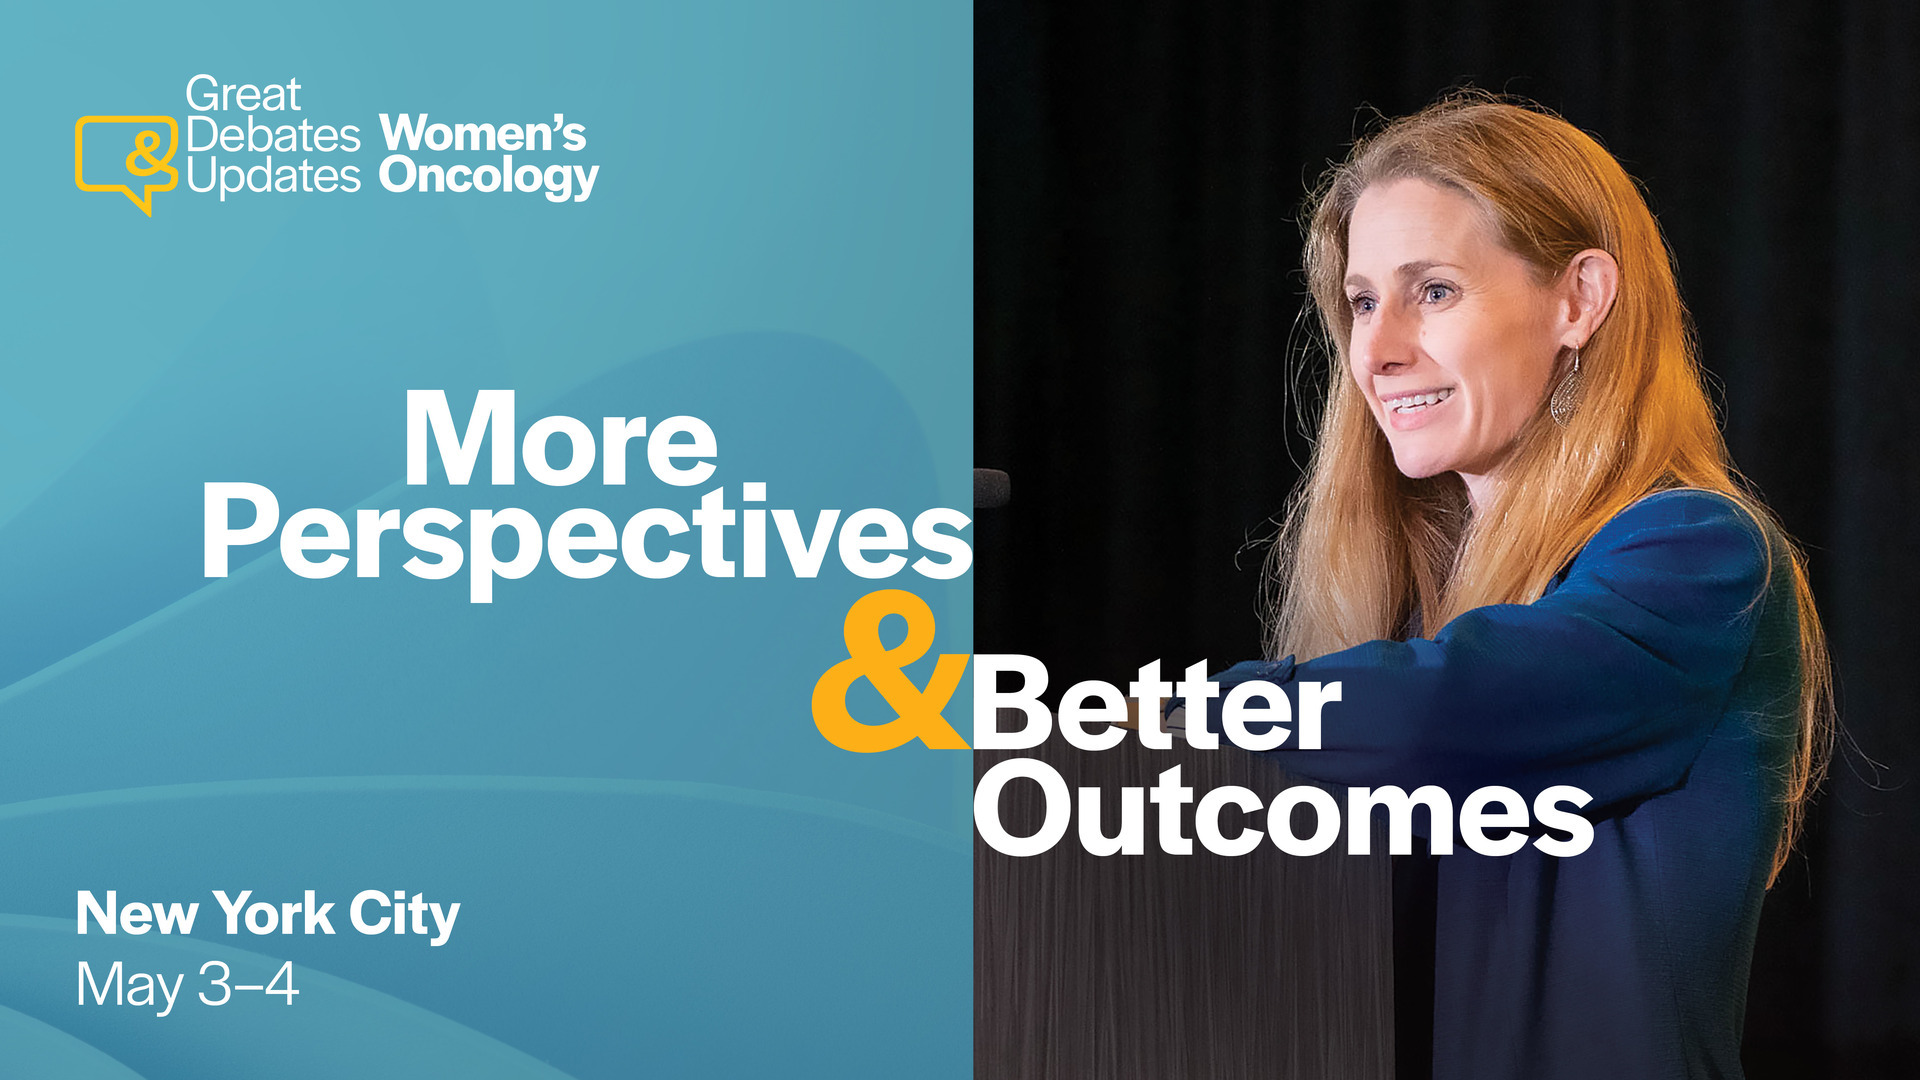 Great Debates and Updates in Women's Oncology | May 3-4 | New York City, New York, United States